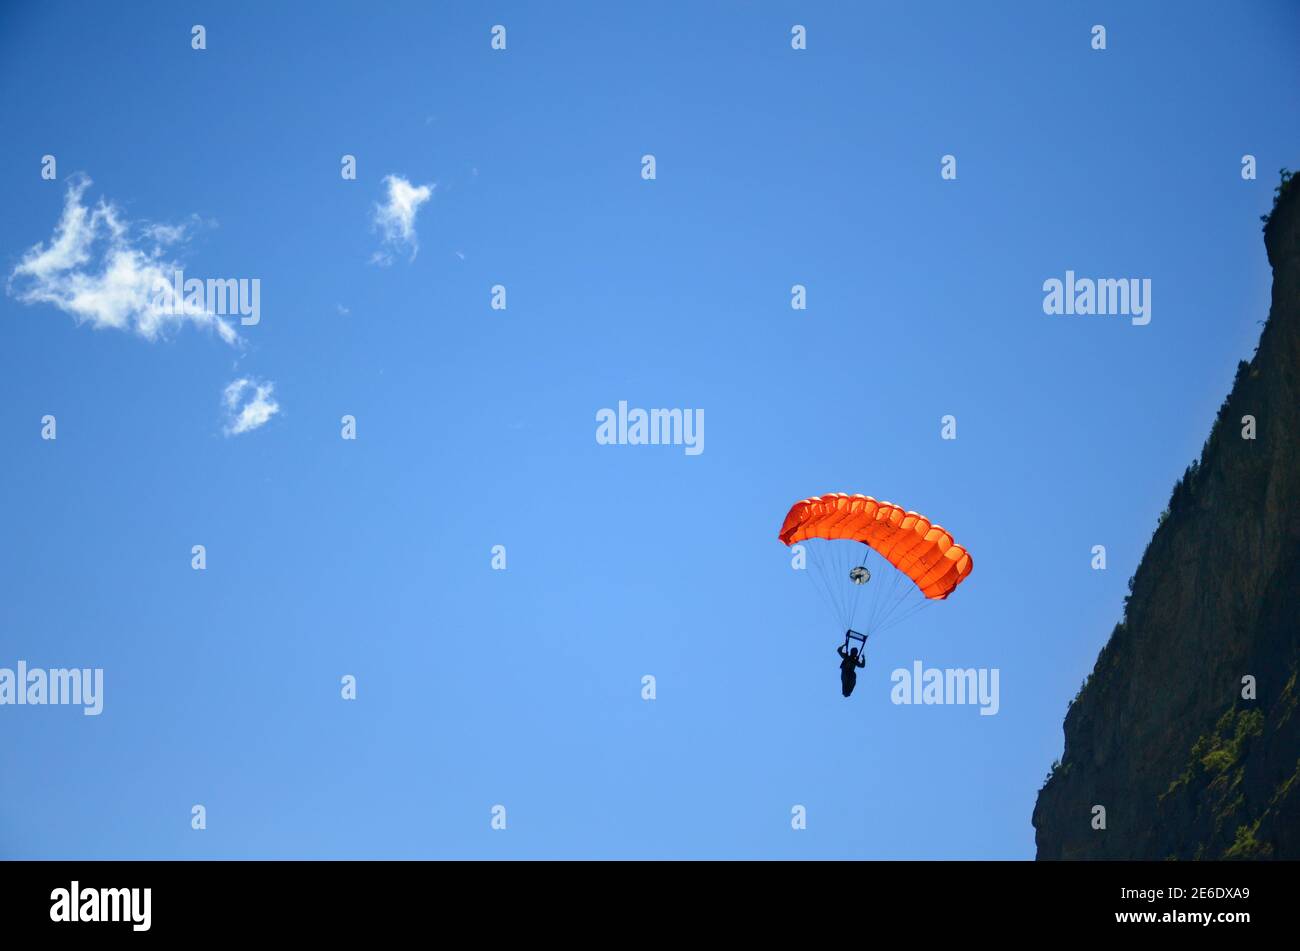 Silhouette of skydiver with parachute against blue sky. Interlaken, Switzerland Stock Photo